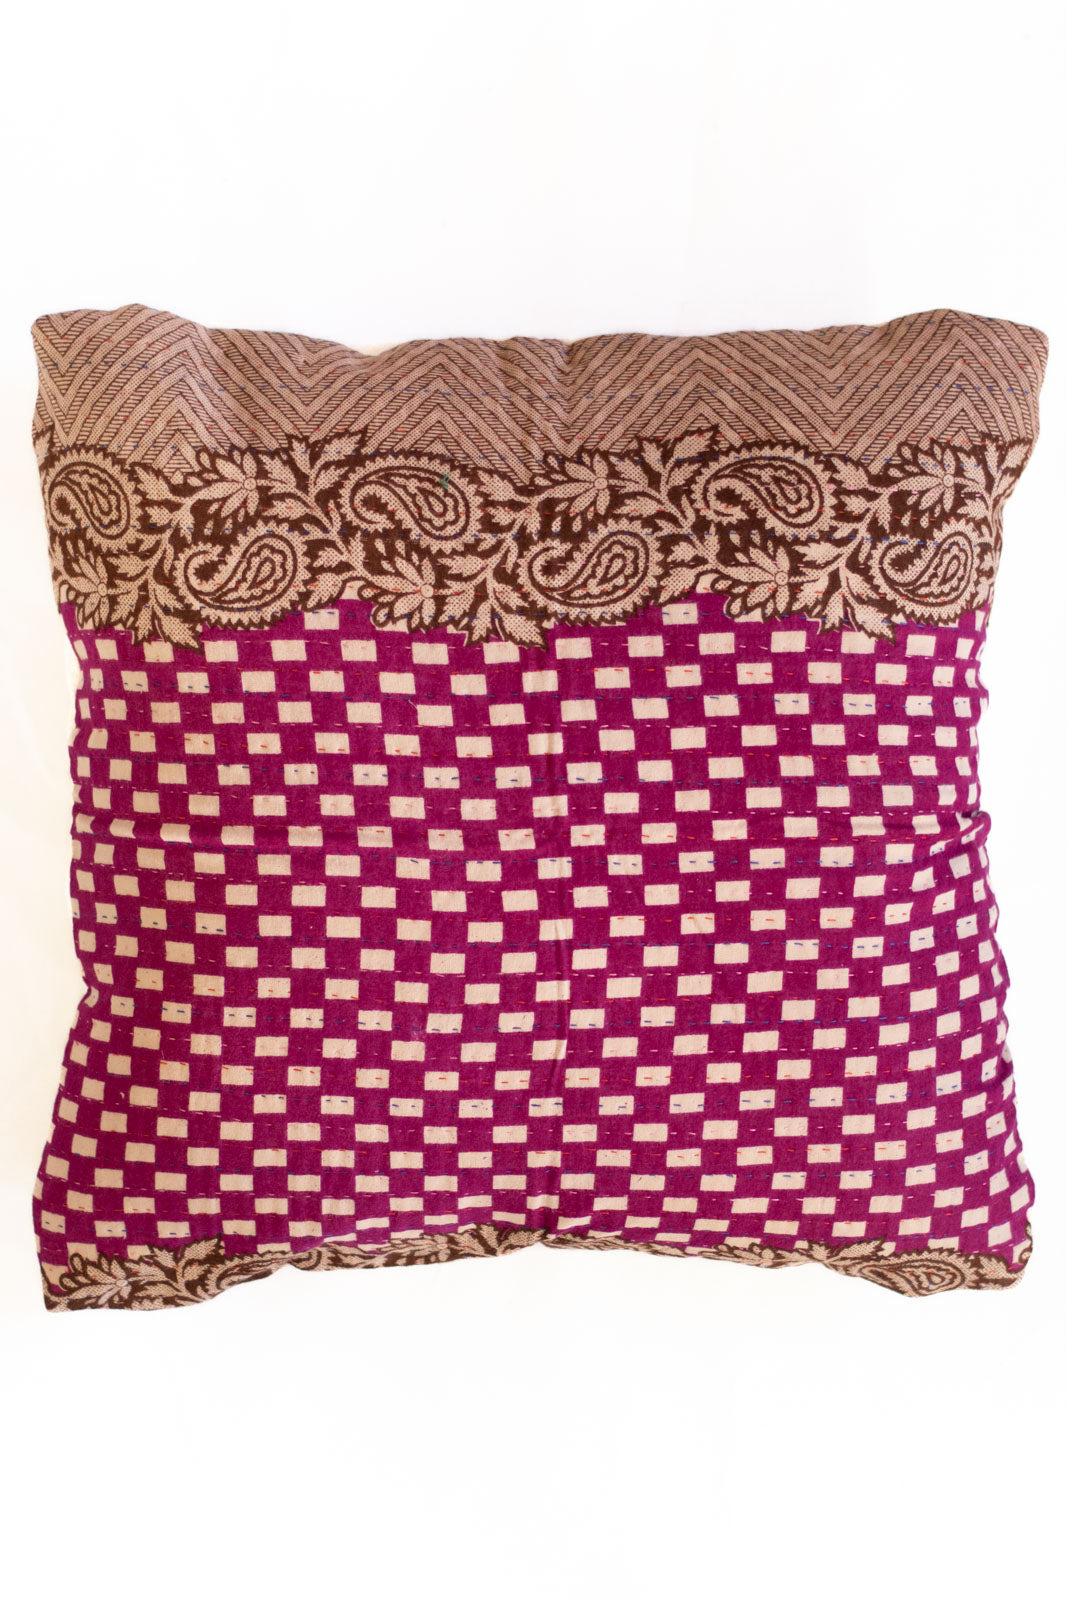 Dignity no. 9 Kantha Pillow Cover